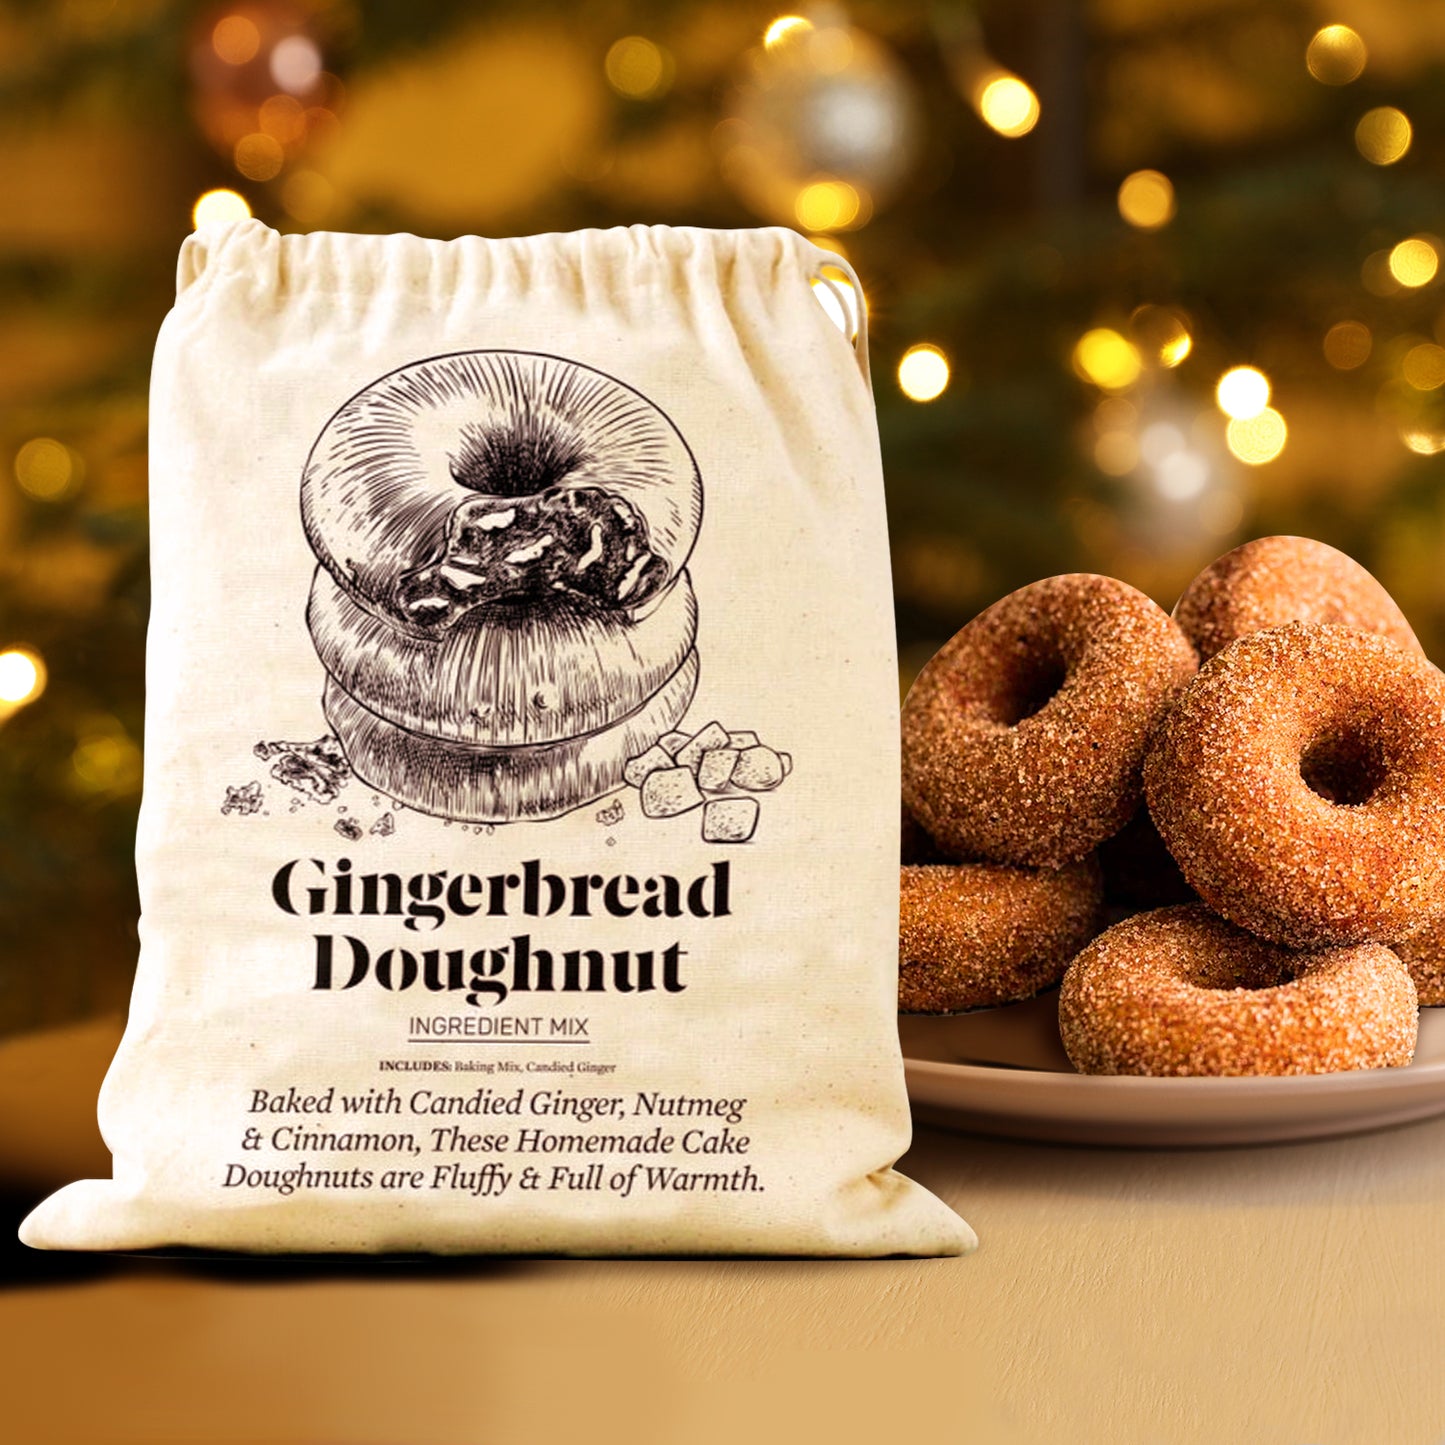 A white canvas sack on a smooth wood table in front of soft white holiday lights. On the sack is black text saying "Gingerbread Doughnut. Baked with candied ginger, nutmeg & cinnamon, these homemade cake doughnuts are fluffy & full of warmth." At the top is a black drawing of a stack of doughnuts. There is a plate of donuts resting behind the bag. 